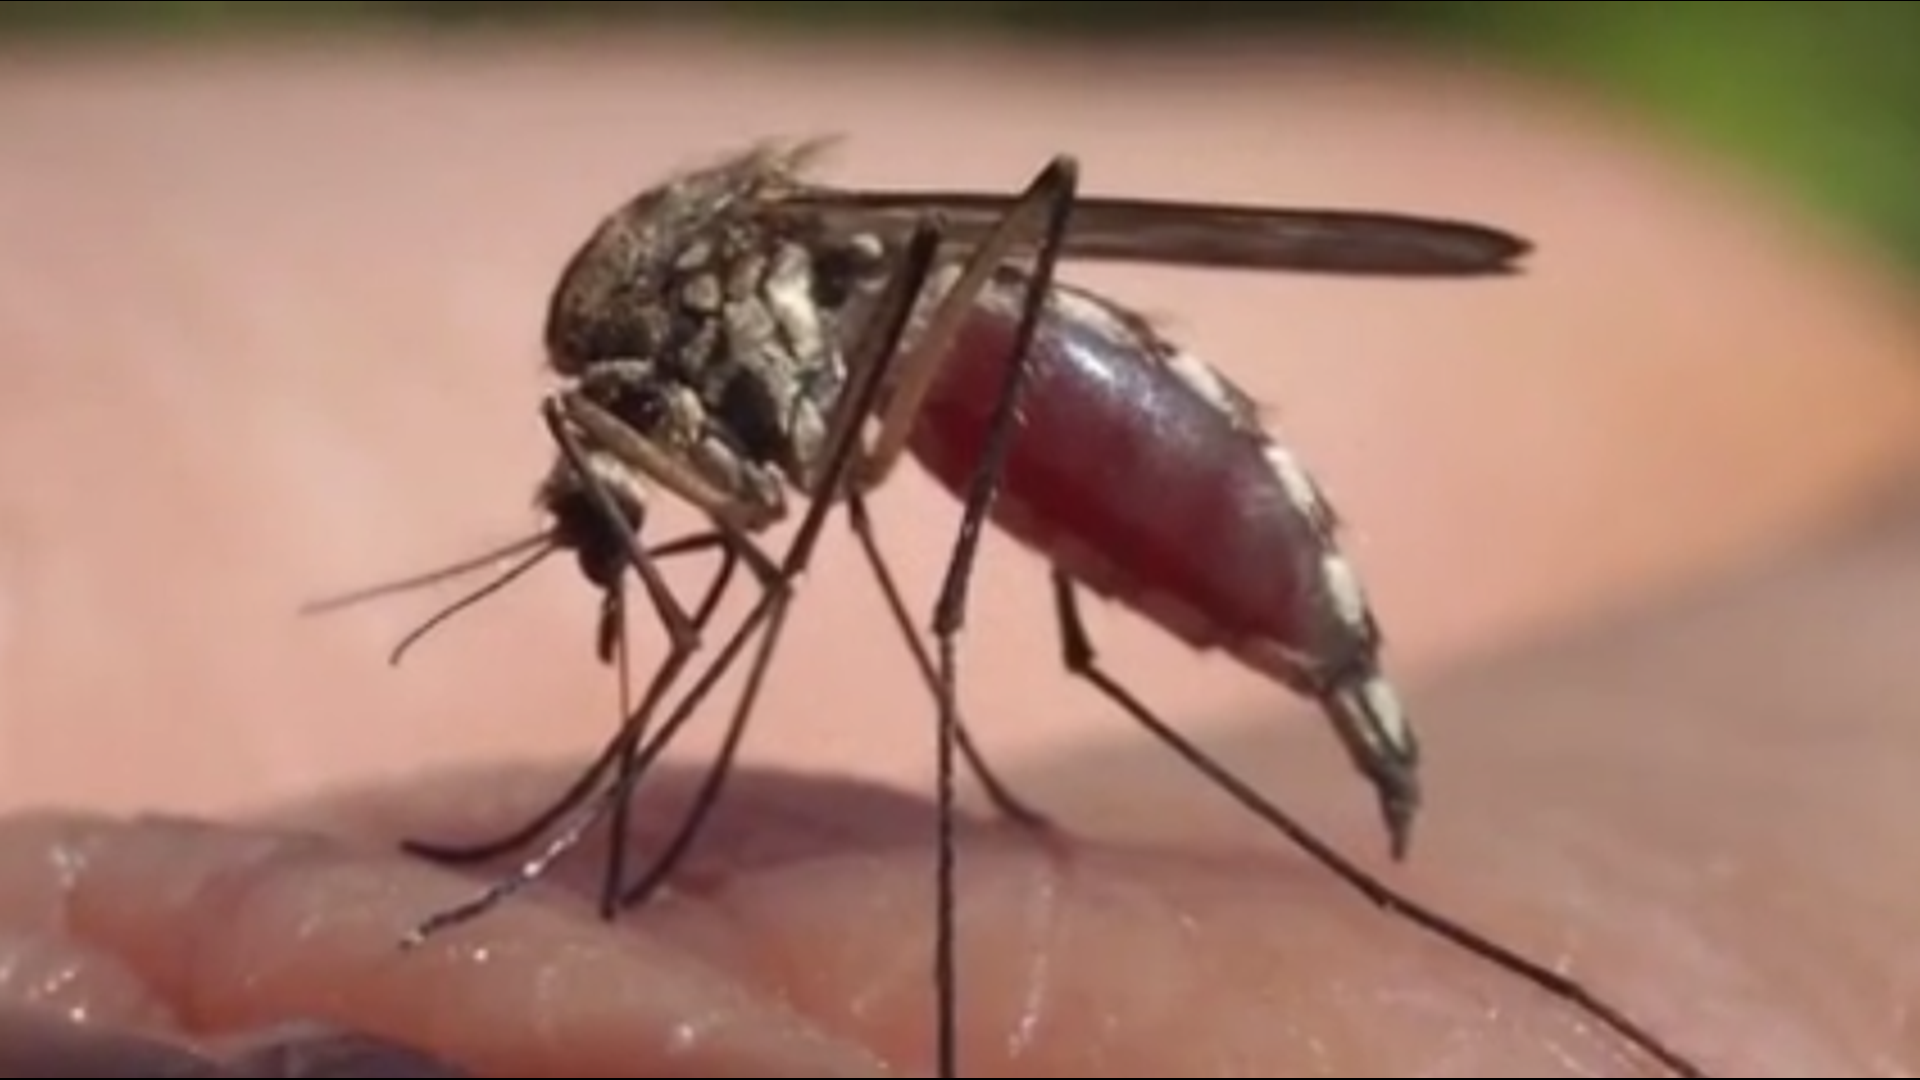 Many people believe that mosquitoes simply die off in the colder months, but is that true?